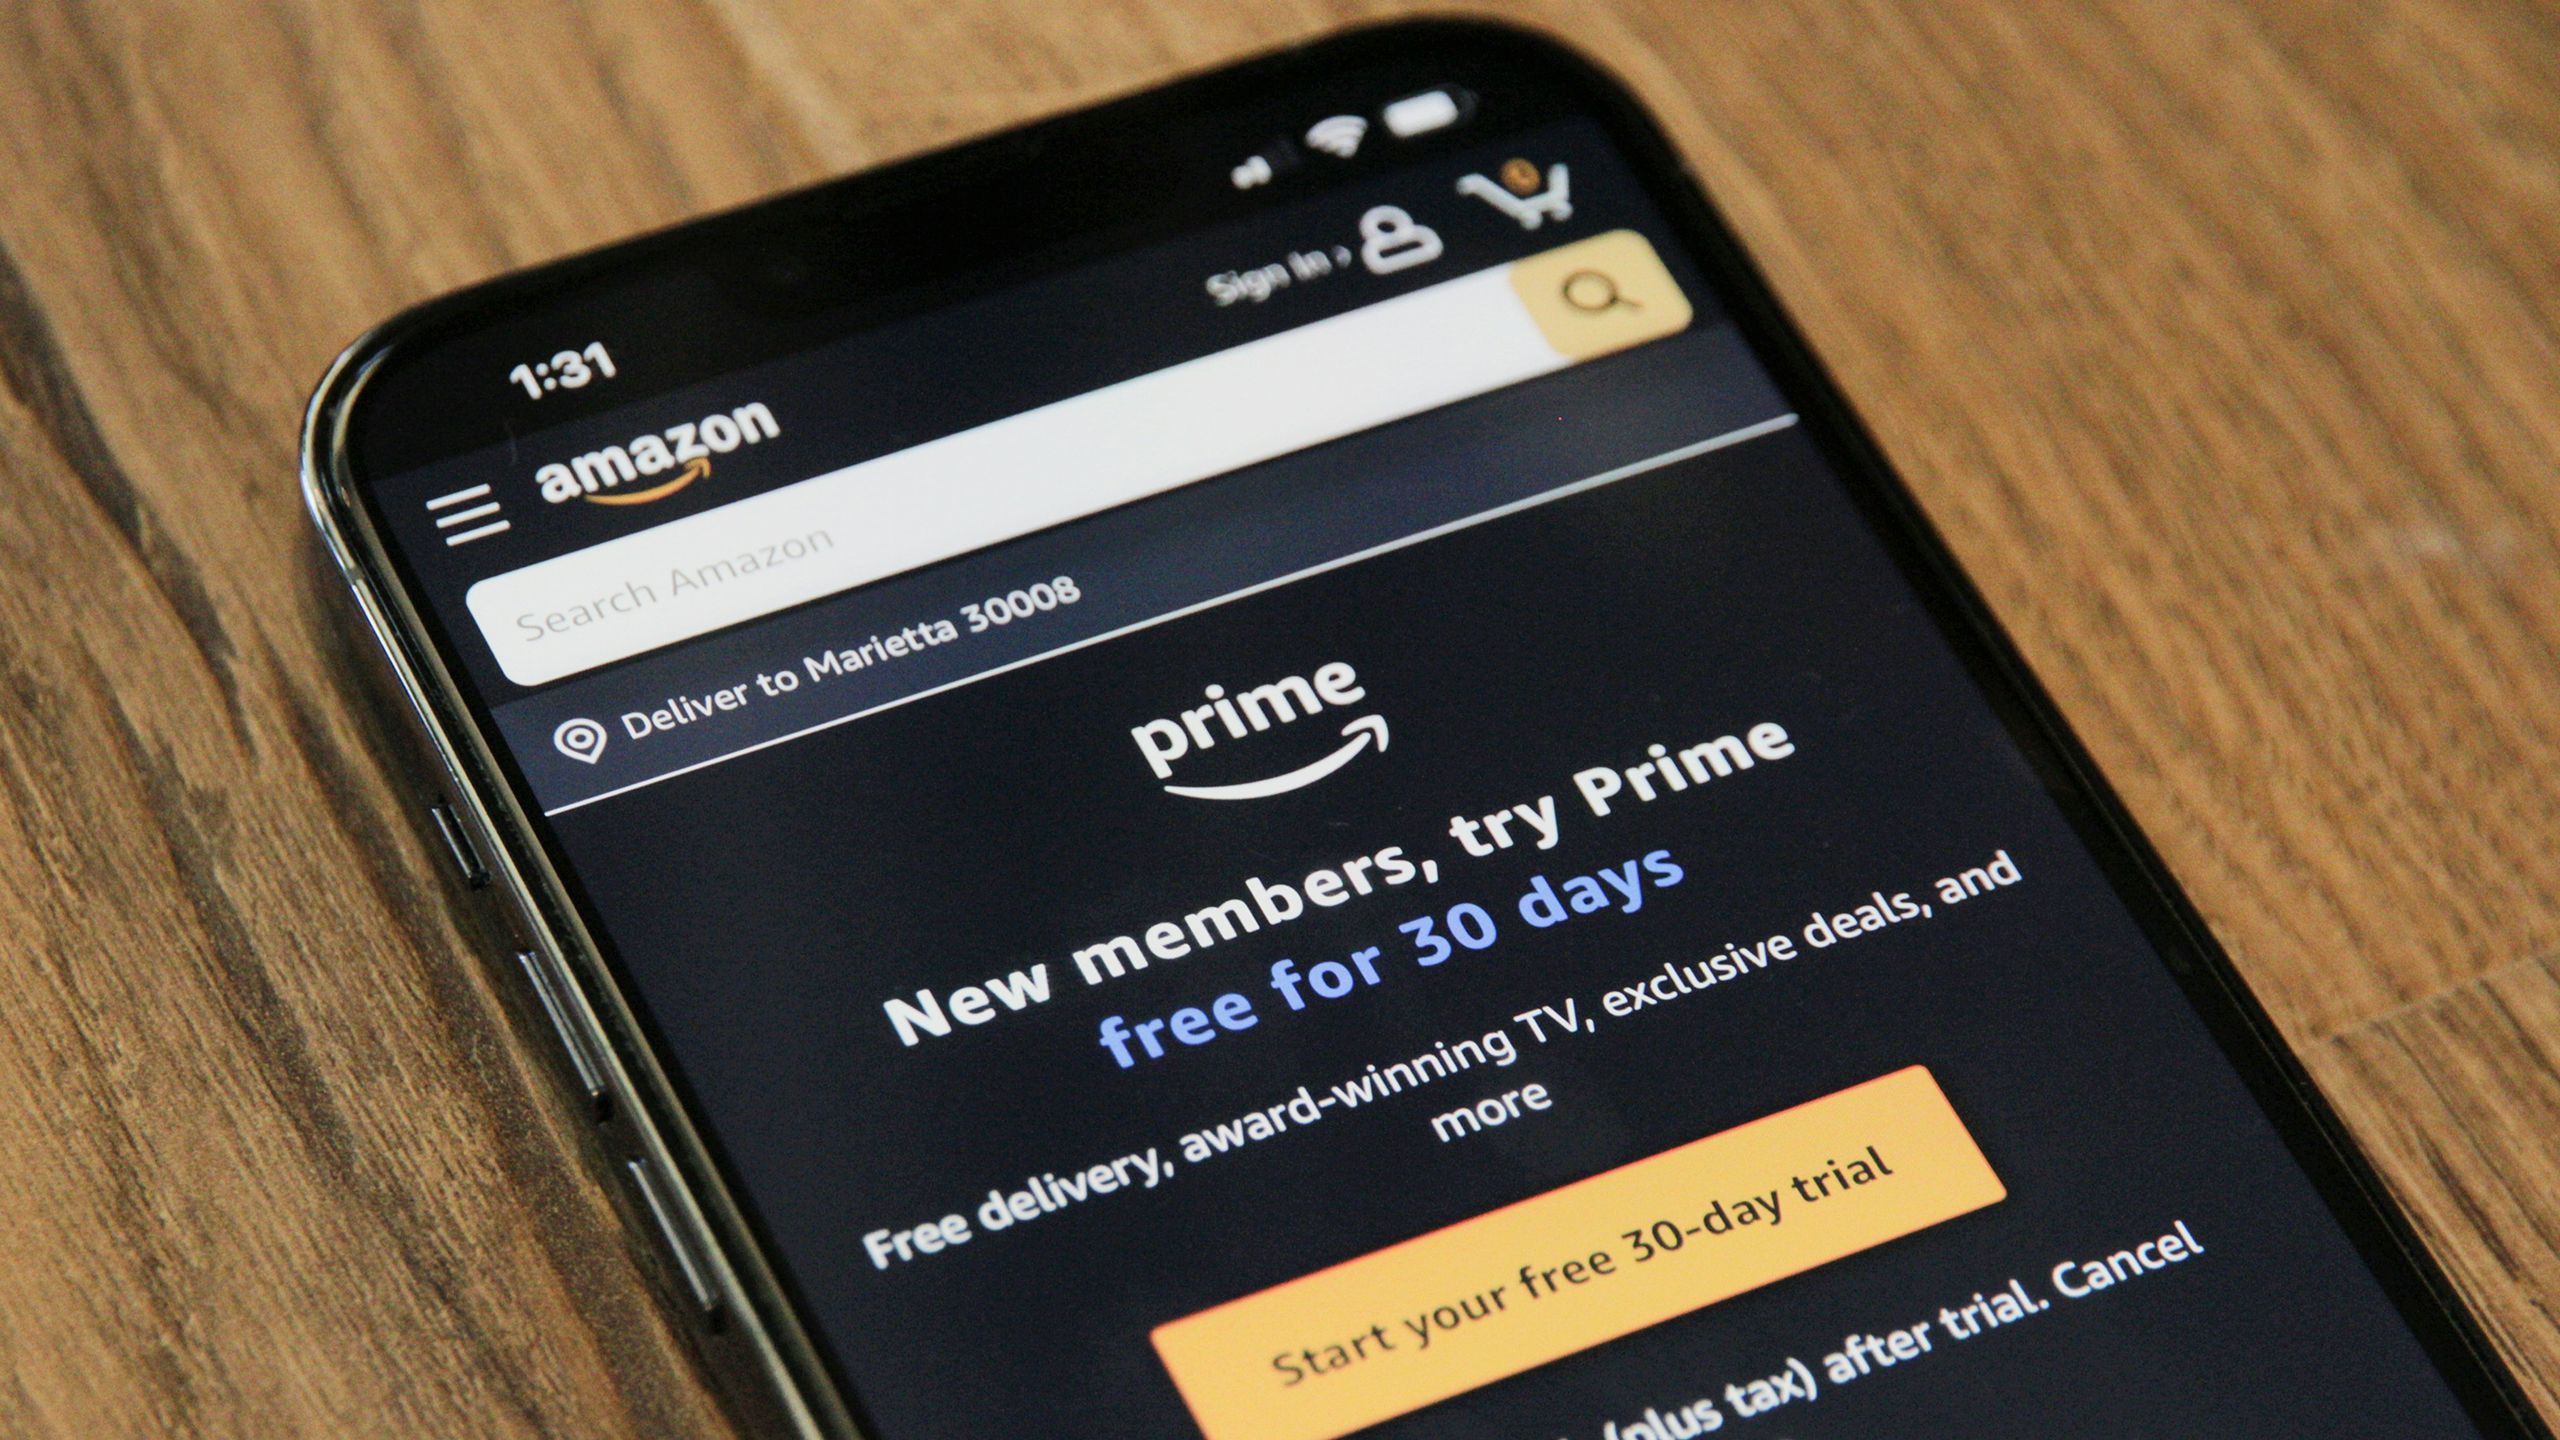 Prime Exclusive Discounts - Everything You Need to Know About Them